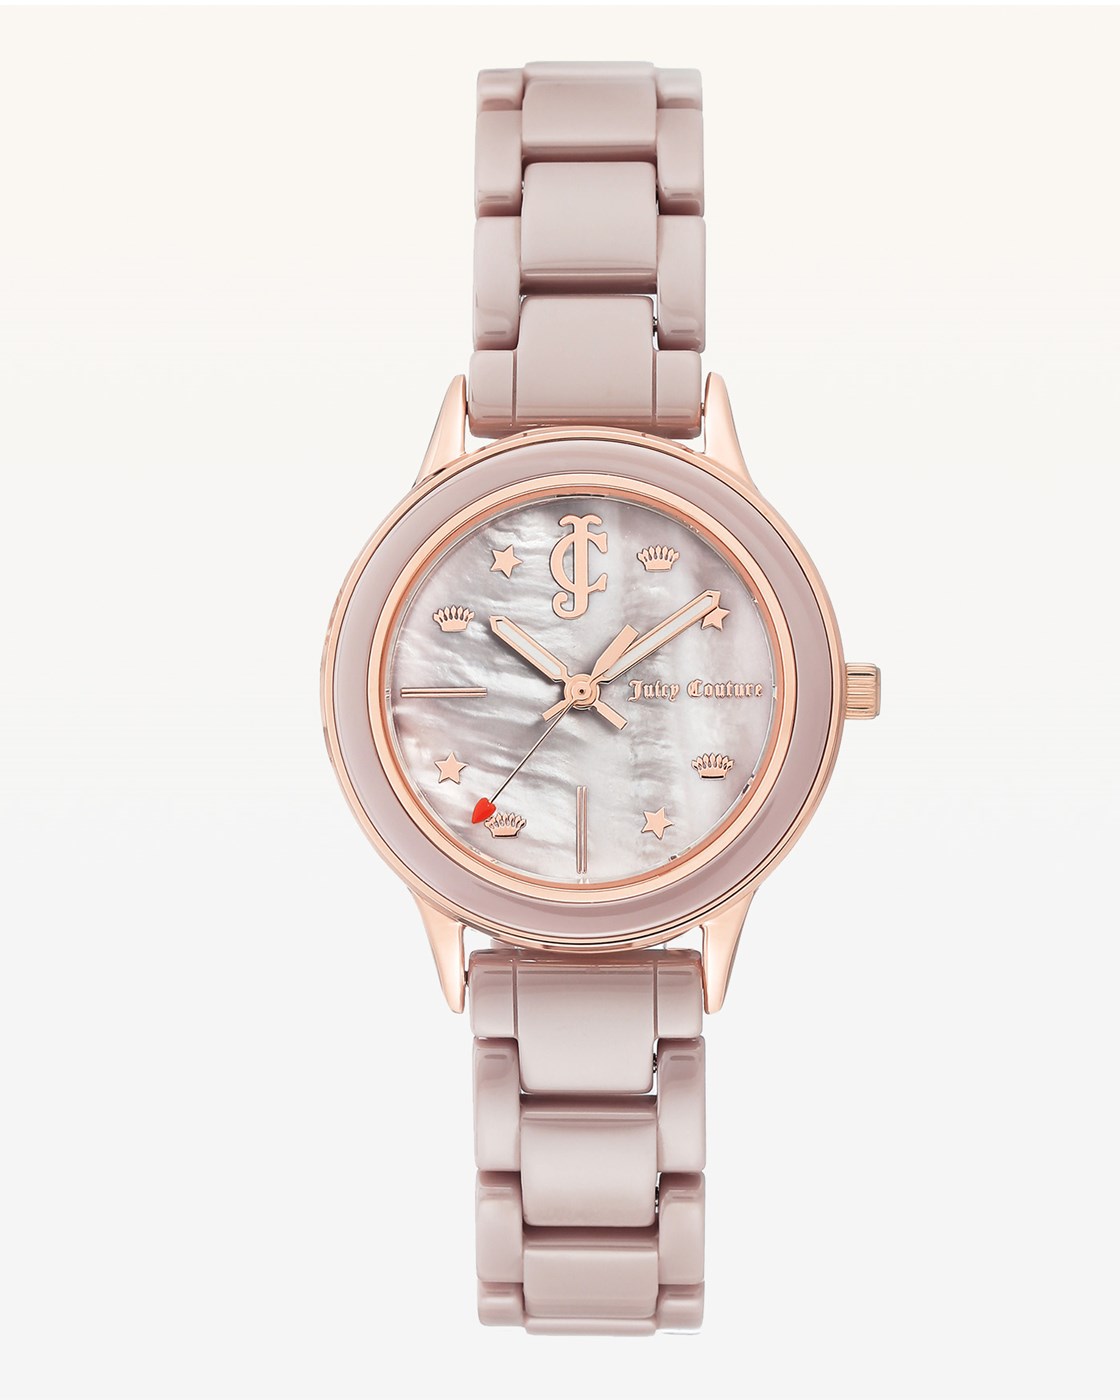 Juicy Couture JC Pink Ceramic Watch